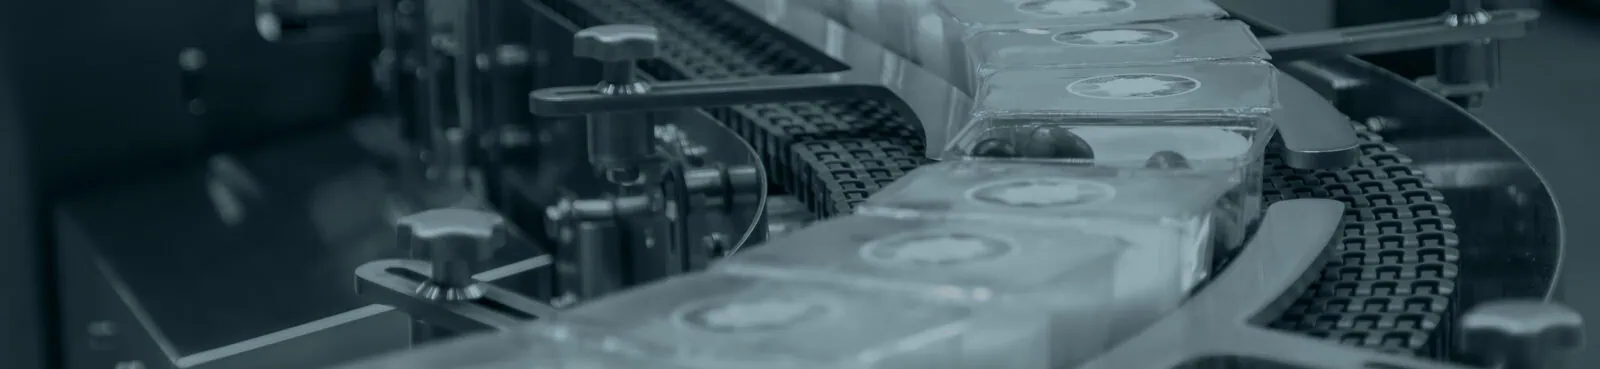  Food packaging on a production line conveyor